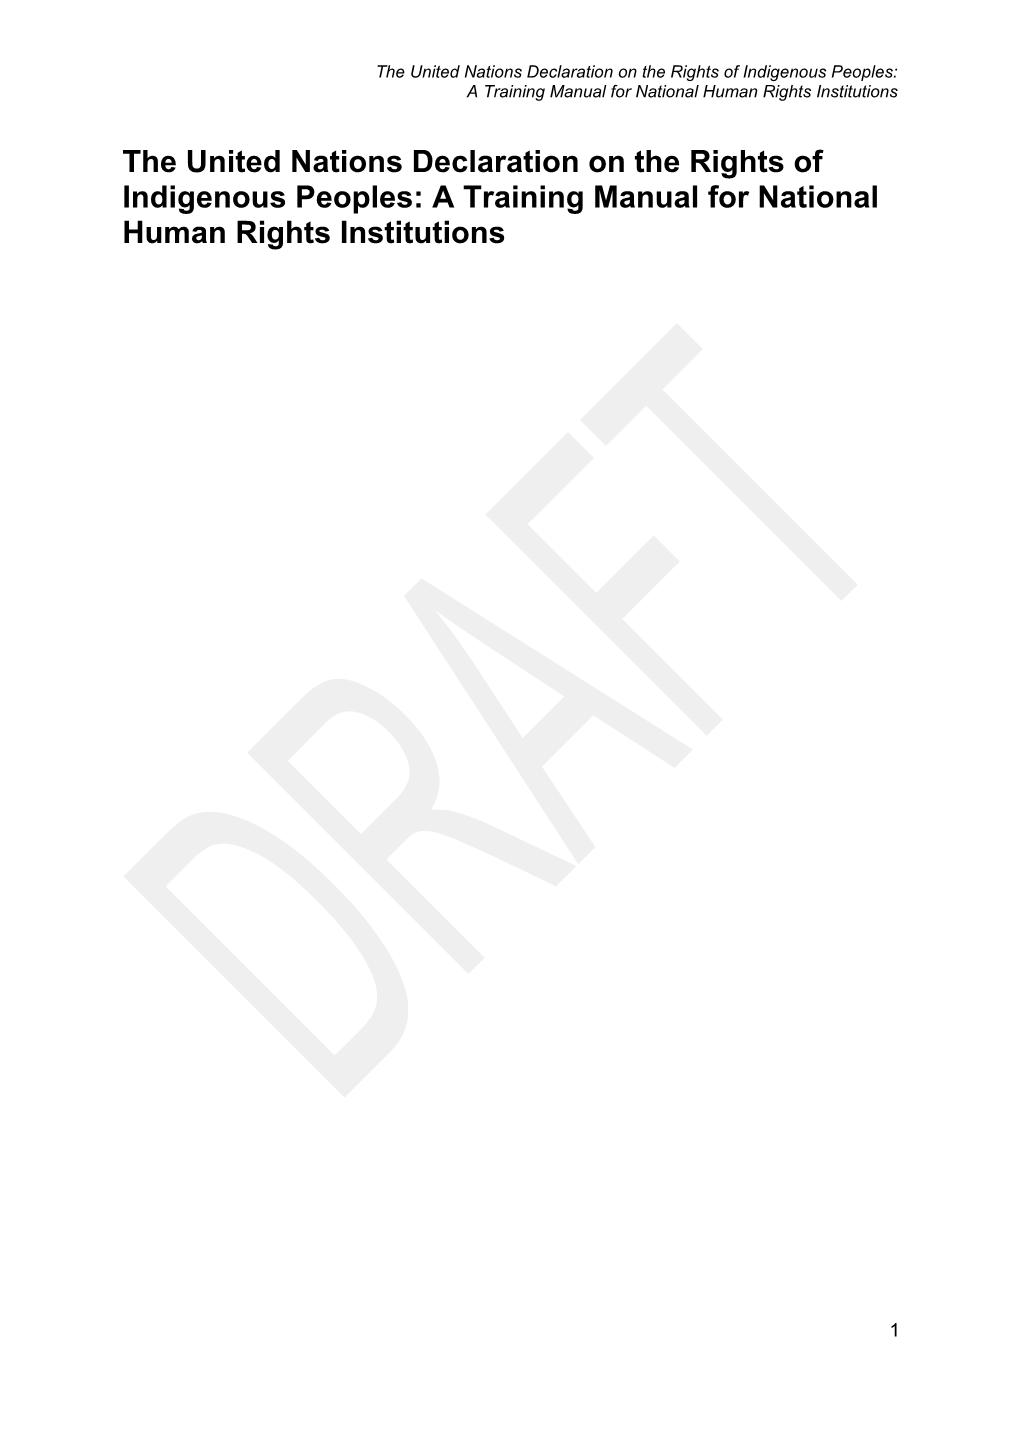 A Training Manual for National Human Rights Institutions